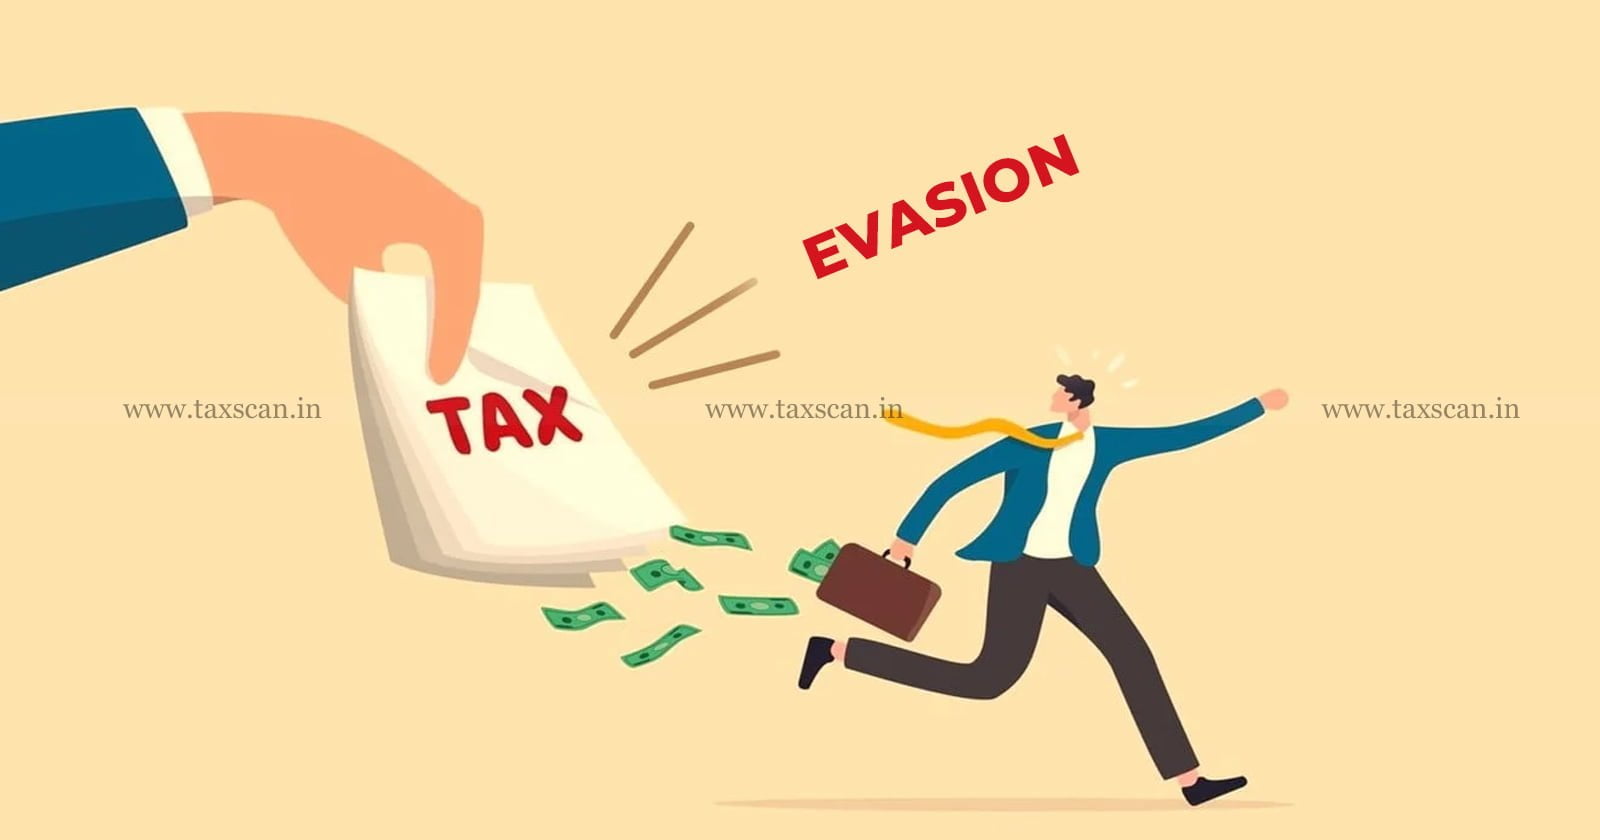 Tax Evasion - Performance Certificate - CESTAT - Penalty - CA - Rule 26 of Central Excise Rule - Central Excise Rule - Chartered Accountants - Taxscan